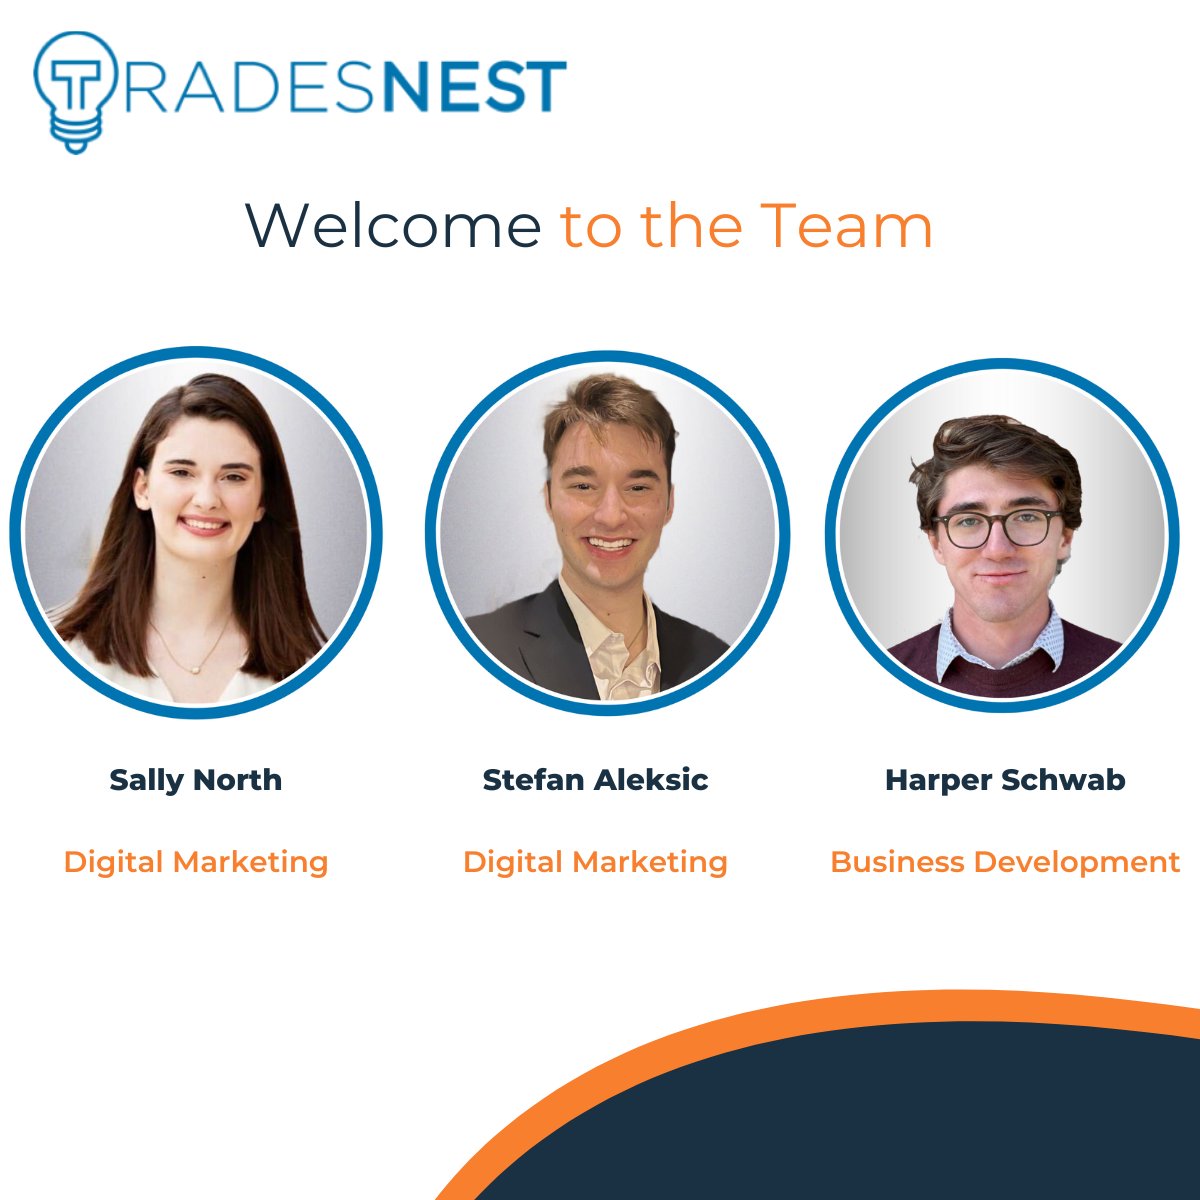 Welcoming new team members 🎉 in our #digitalmarketing and #businessdevelopment departments! We are so excited to grow our #team and look forward to your contributions. Say hello to Sally, Stefan, and Harper!

#amsterdamstartup #futureoftech #b2bmarketing #globalbrand